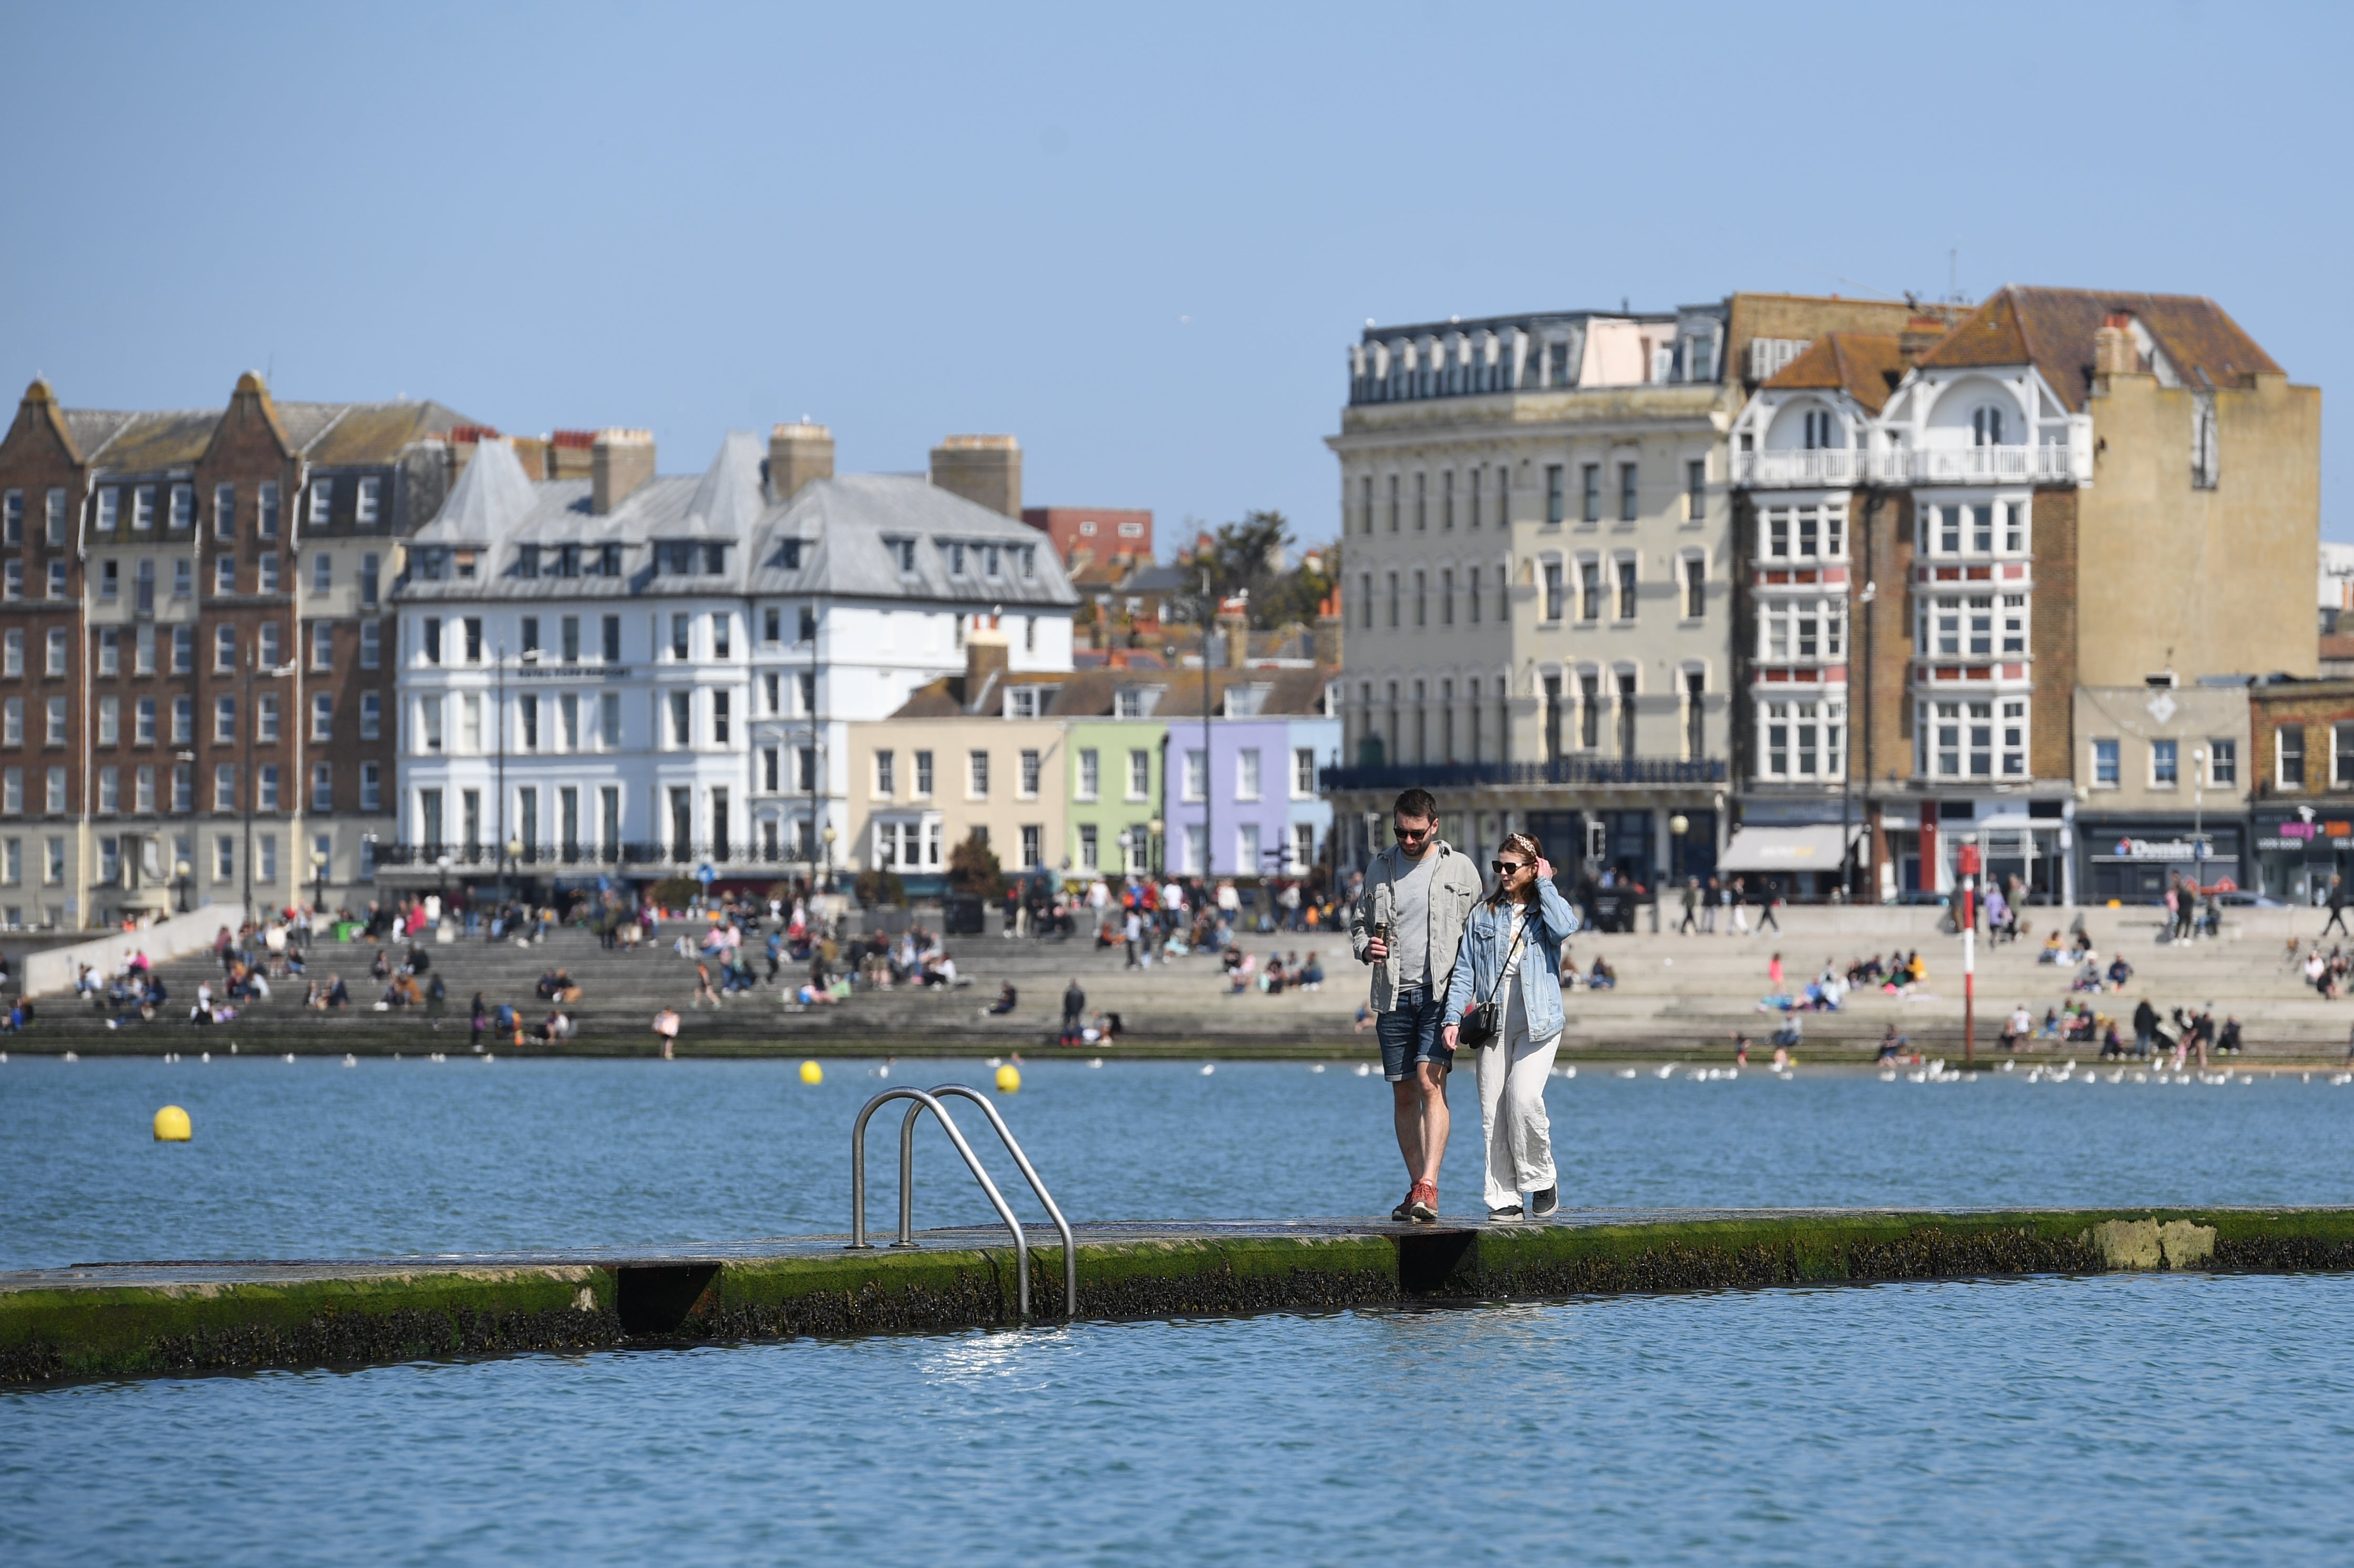 In Margate in Kent, the average price tag on a home has doubled over the past decade, according to Rightmove (Kirsty O’Connor/PA)